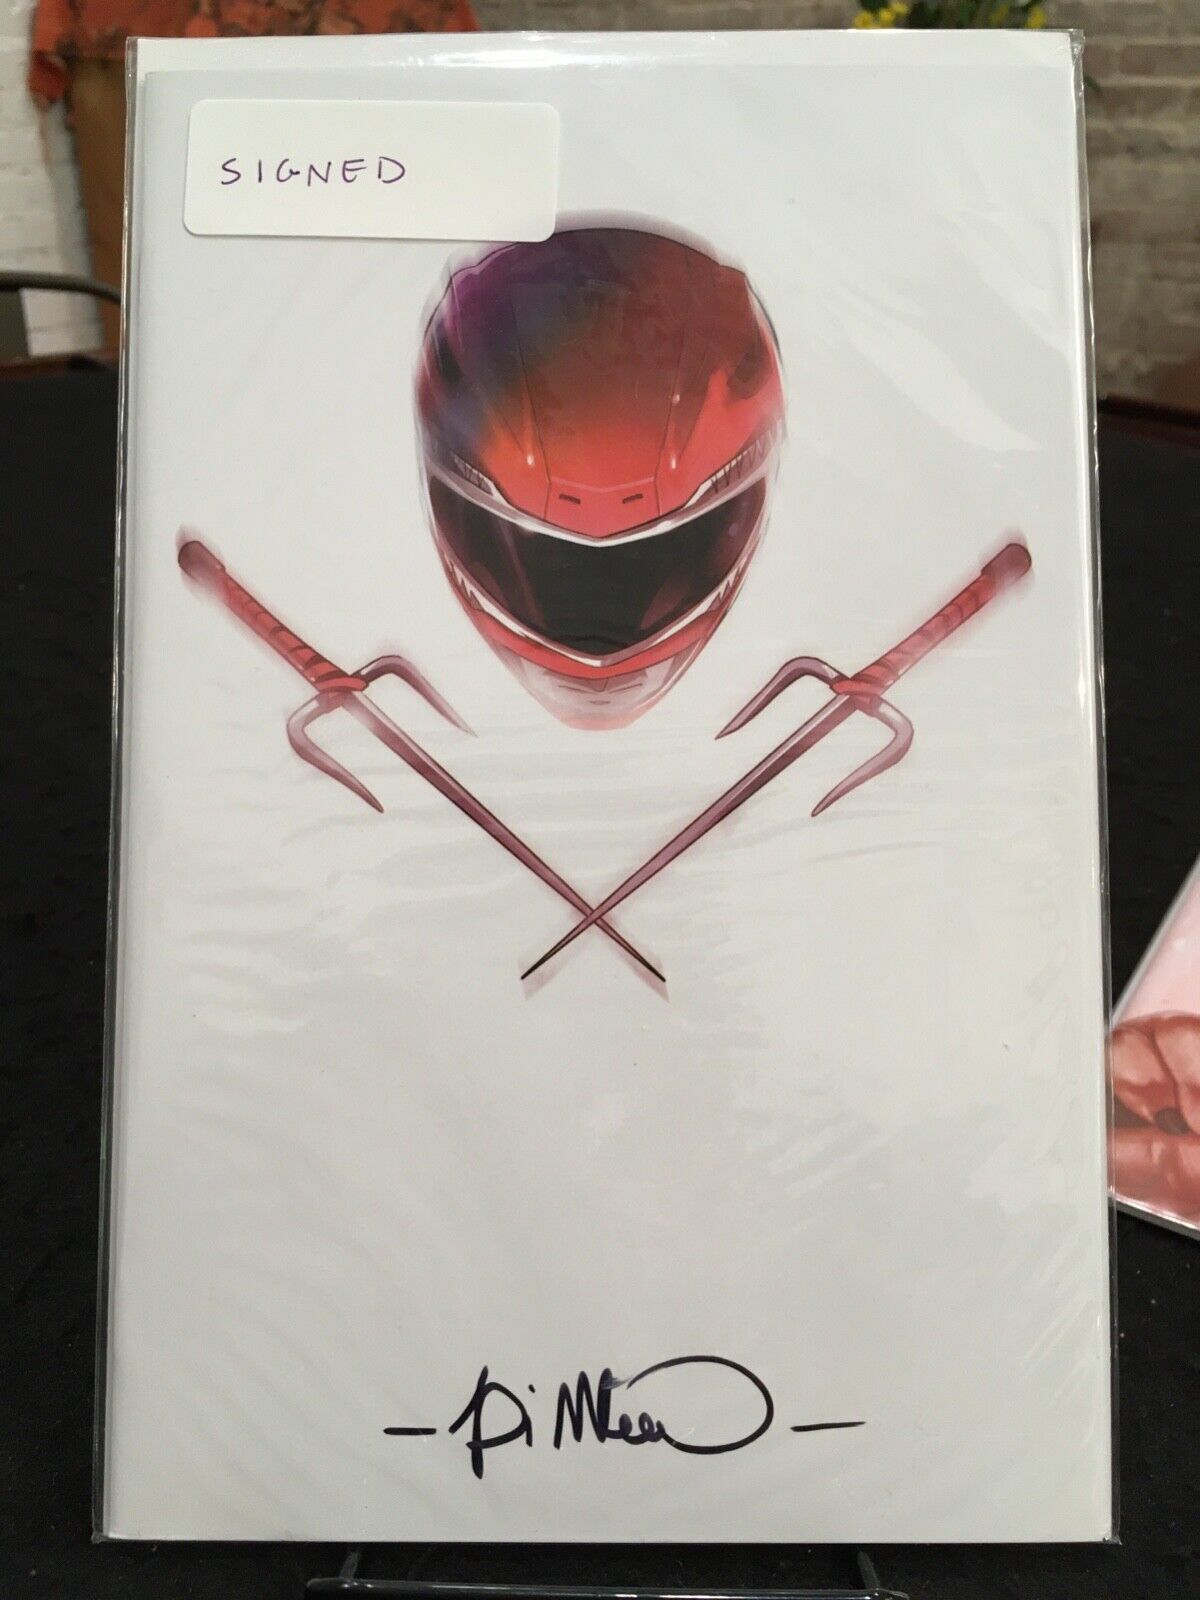 MIGHTY MORPHING POWER RANGERS/TMNT 1 SIGNED NEW YORK SLICE EDITION NYCC 2019